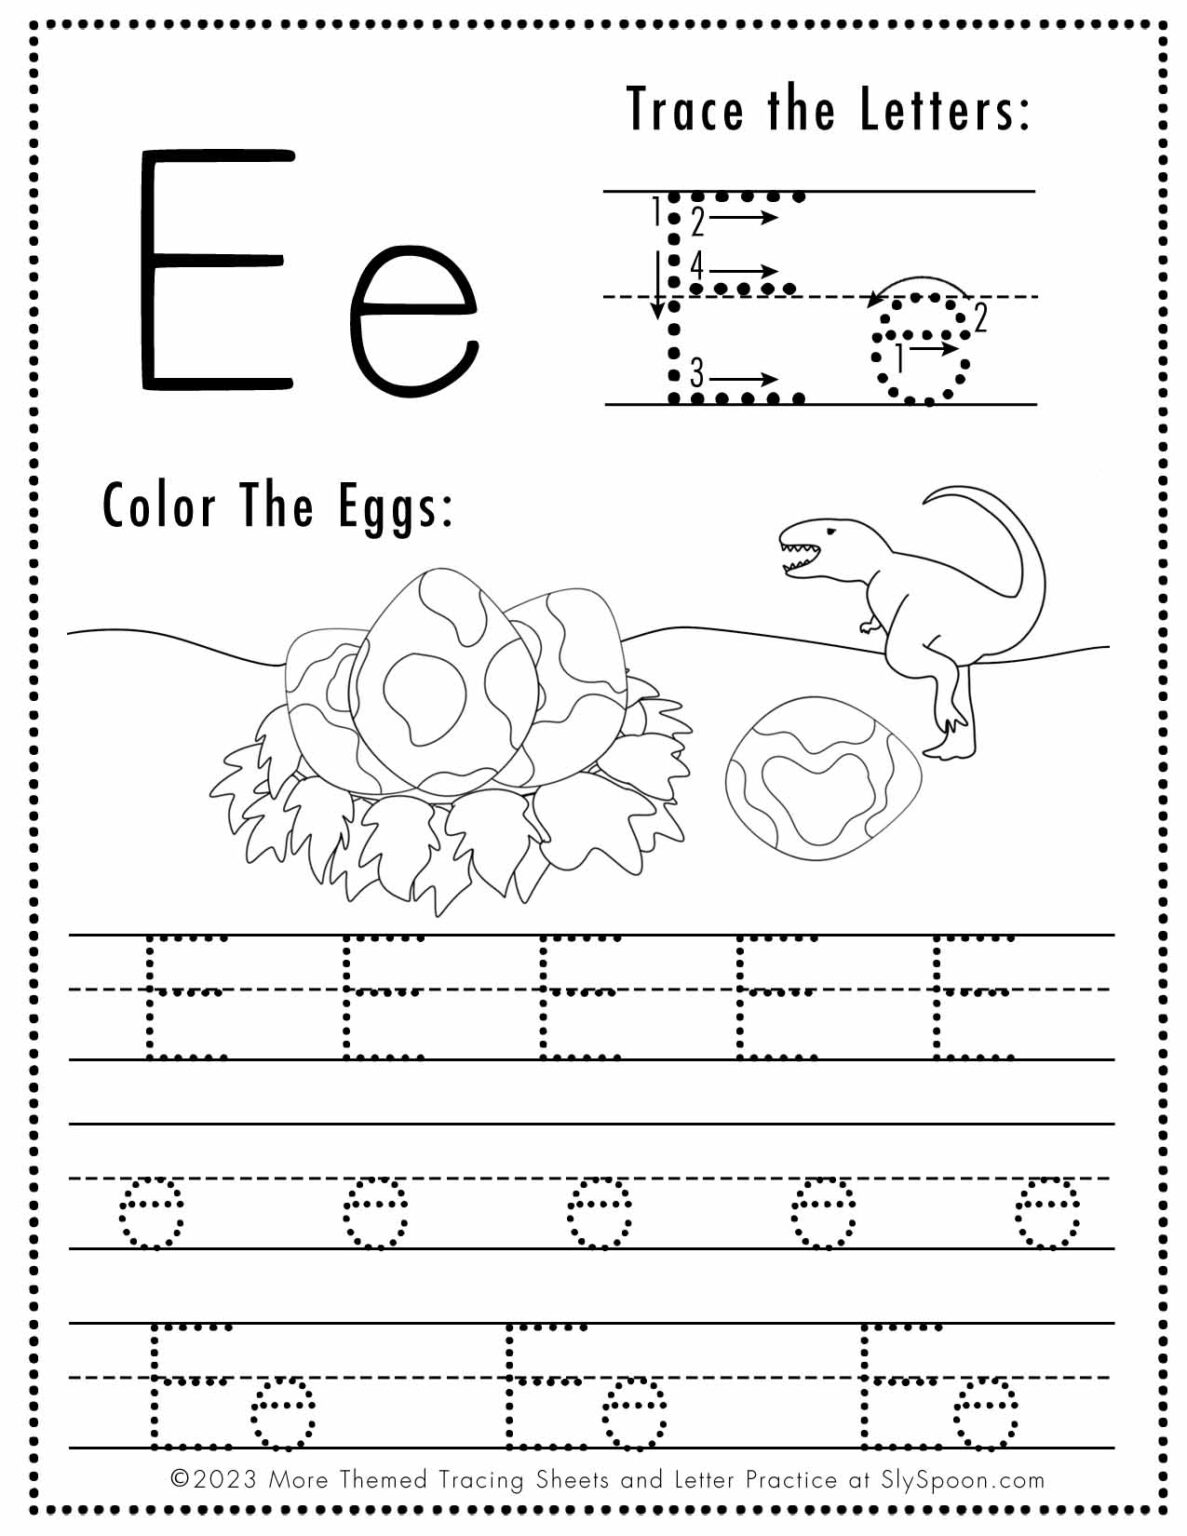 Free Letter E Tracing Worksheet (Printable) Dinosaur Themed - Sly Spoon